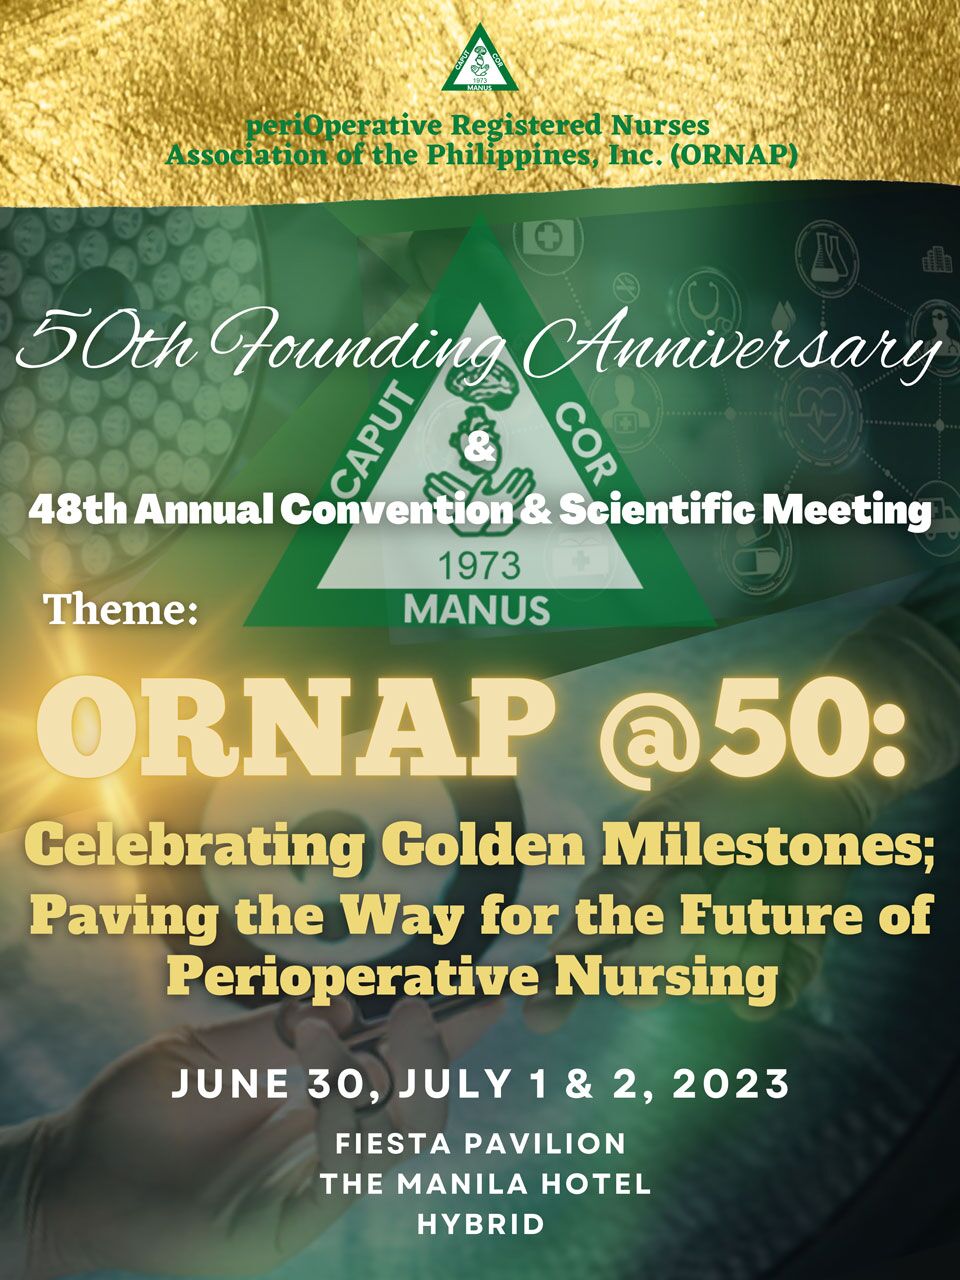 50th Founding Anniversary and 48th Annual Convention & Scientific